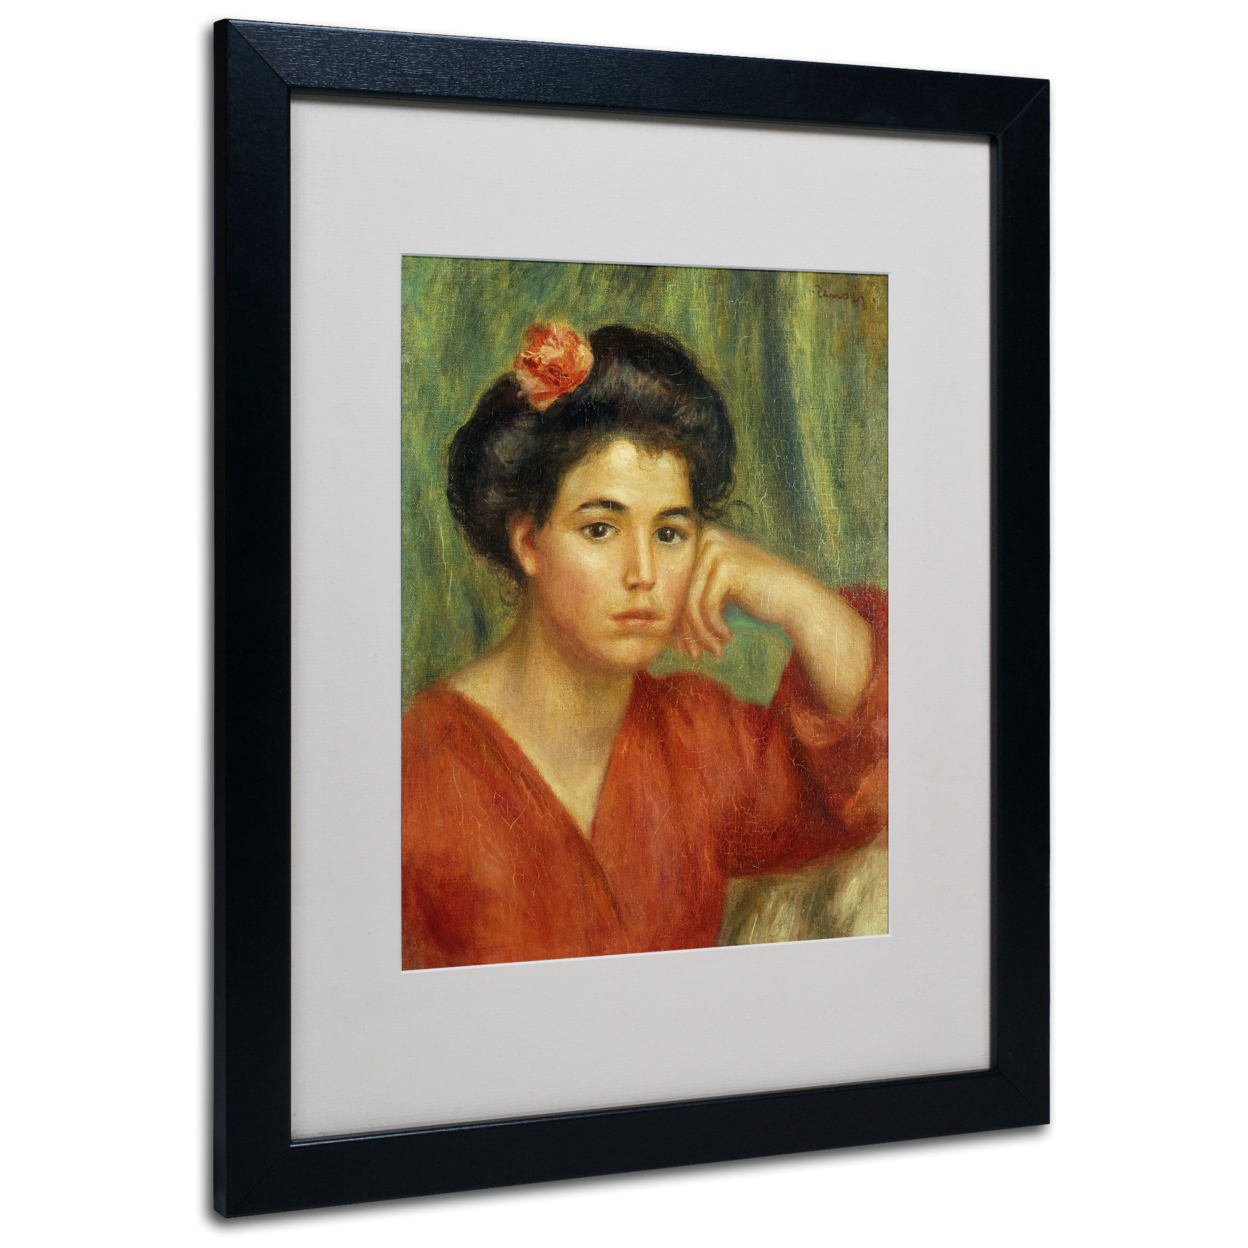 Pierre Renoir 'Young Woman With A Rose' Black Wooden Framed Art 18 X 22 Inches